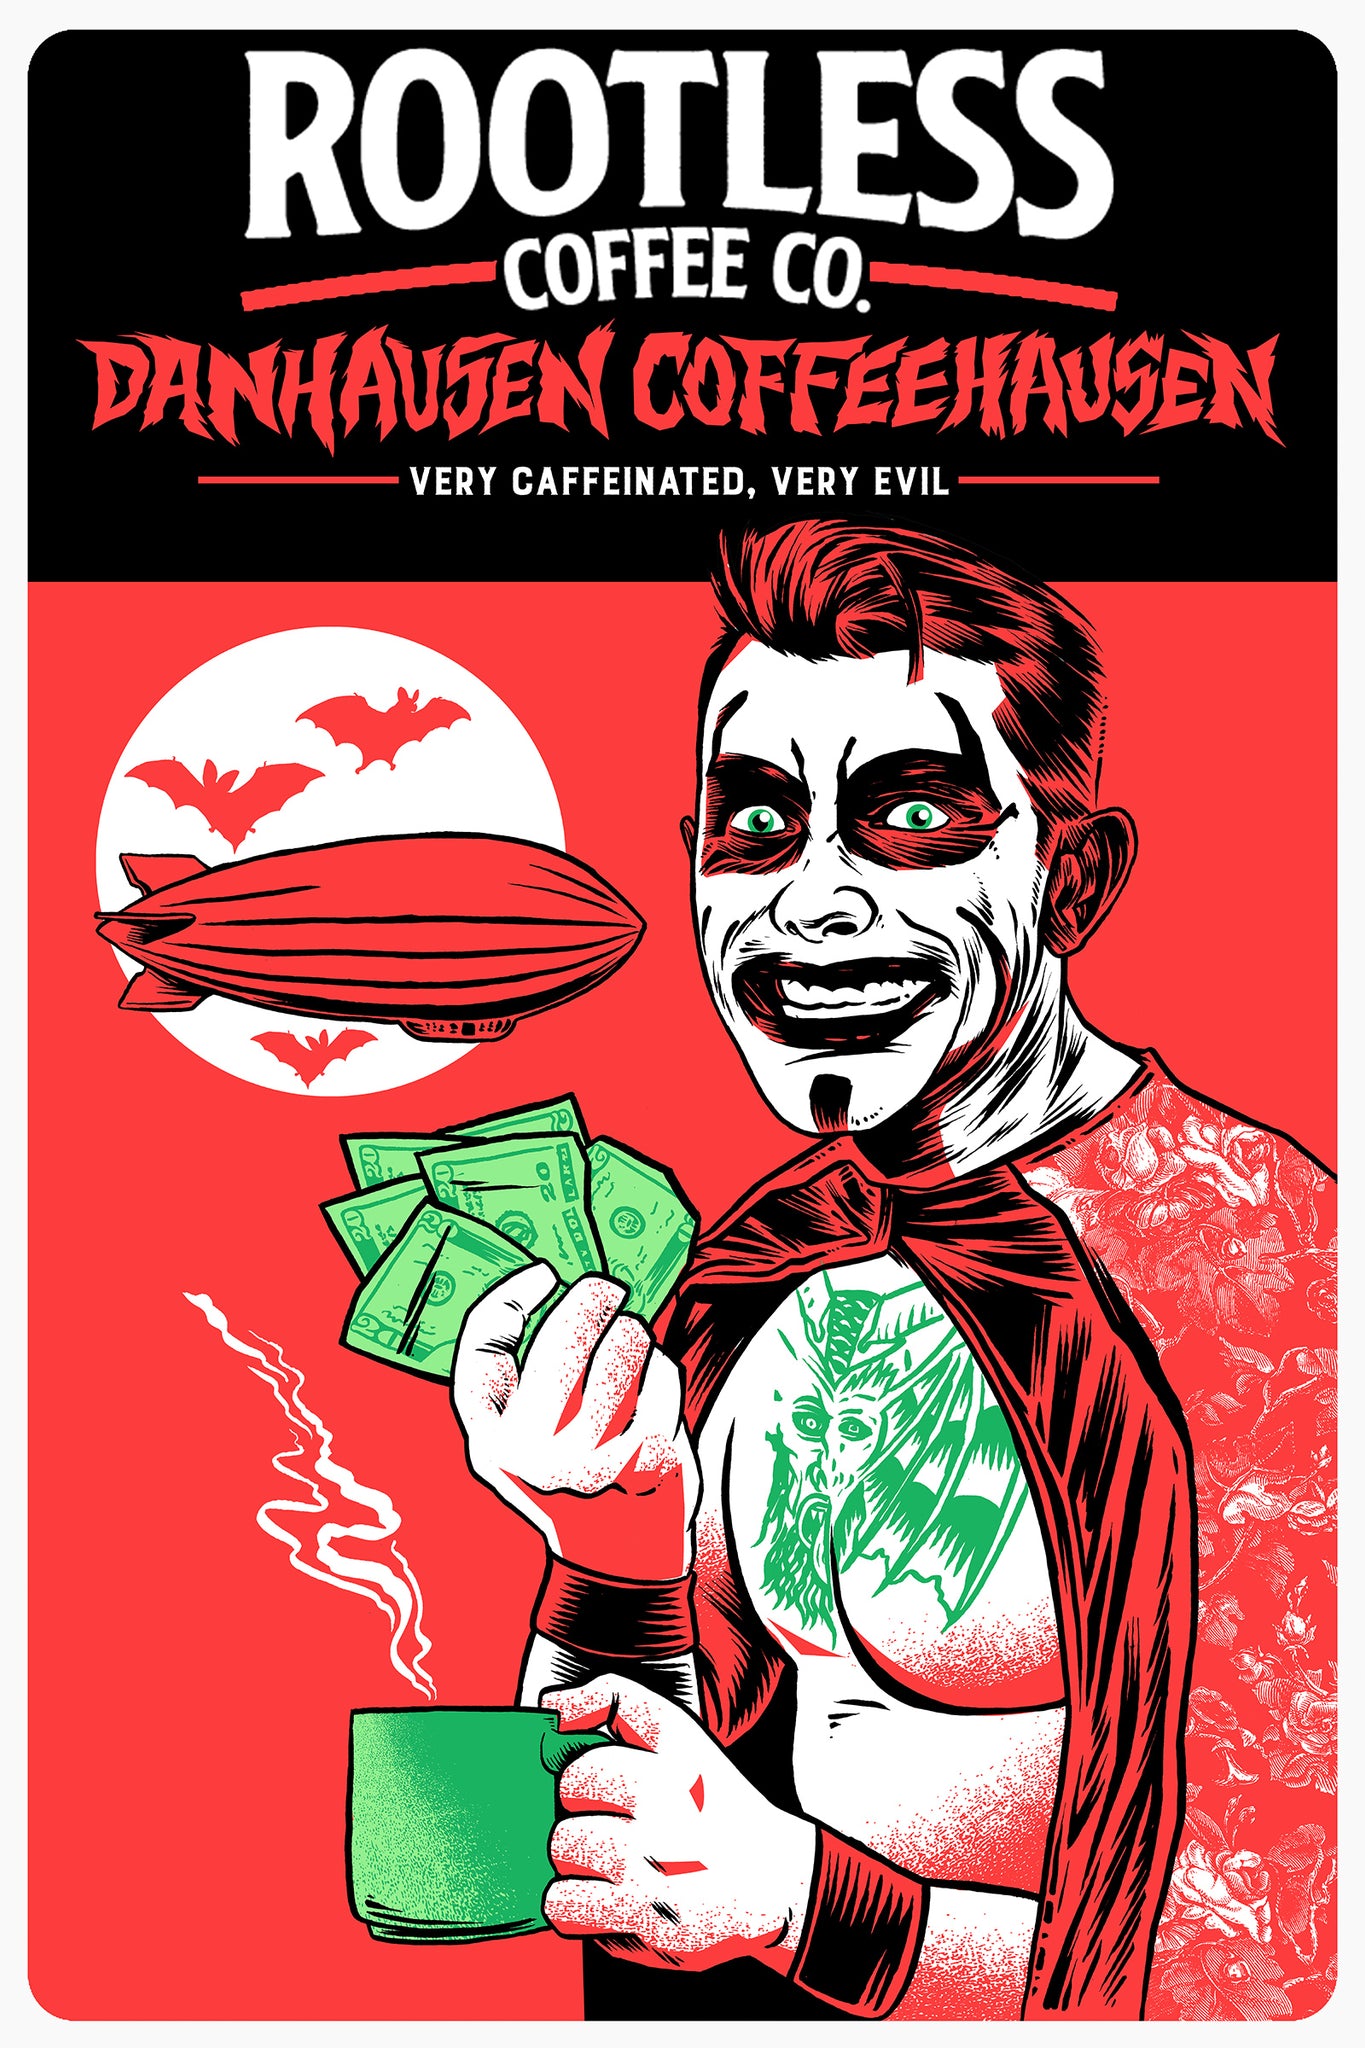 If you like quirky, you'll love that Danhausen